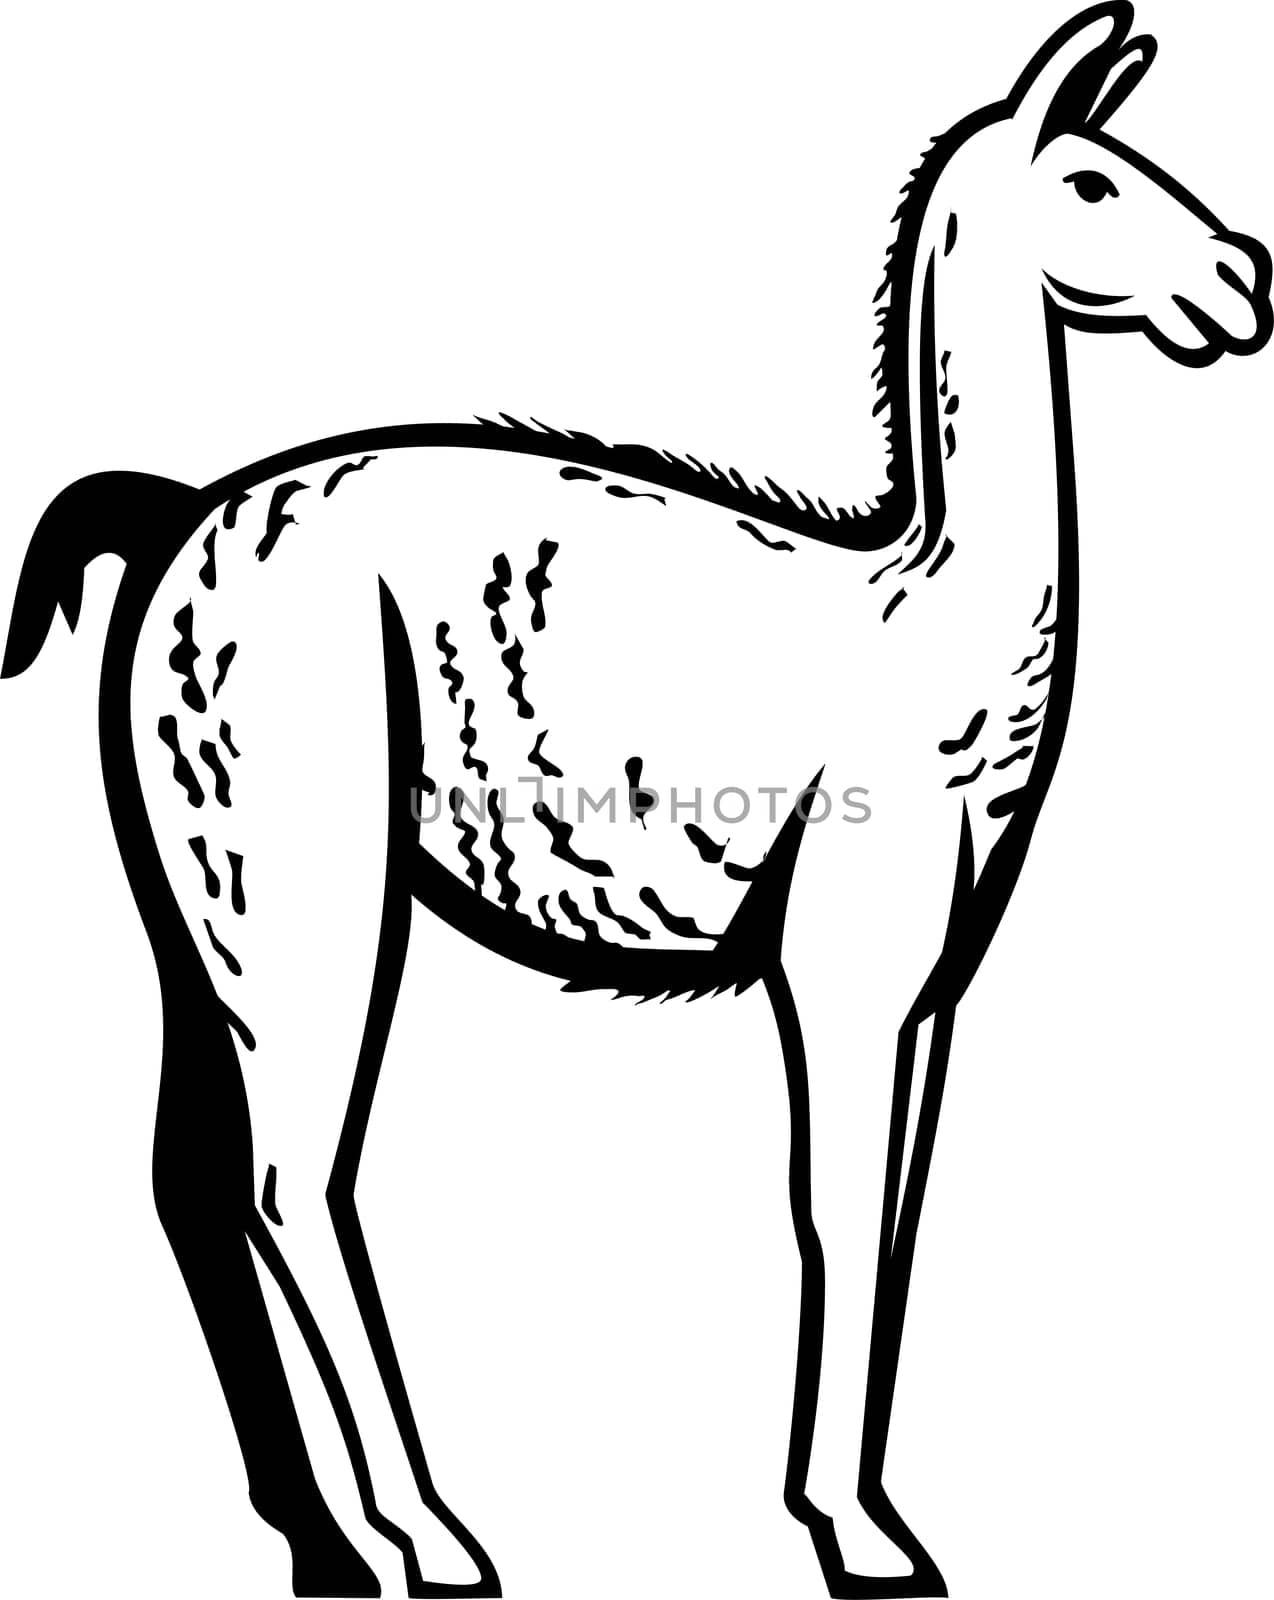 Mascot illustration of wild guanaco or Lama guanicoe, a camelid native to South America, closely related to the llama viewed from side on isolated background in retro style.